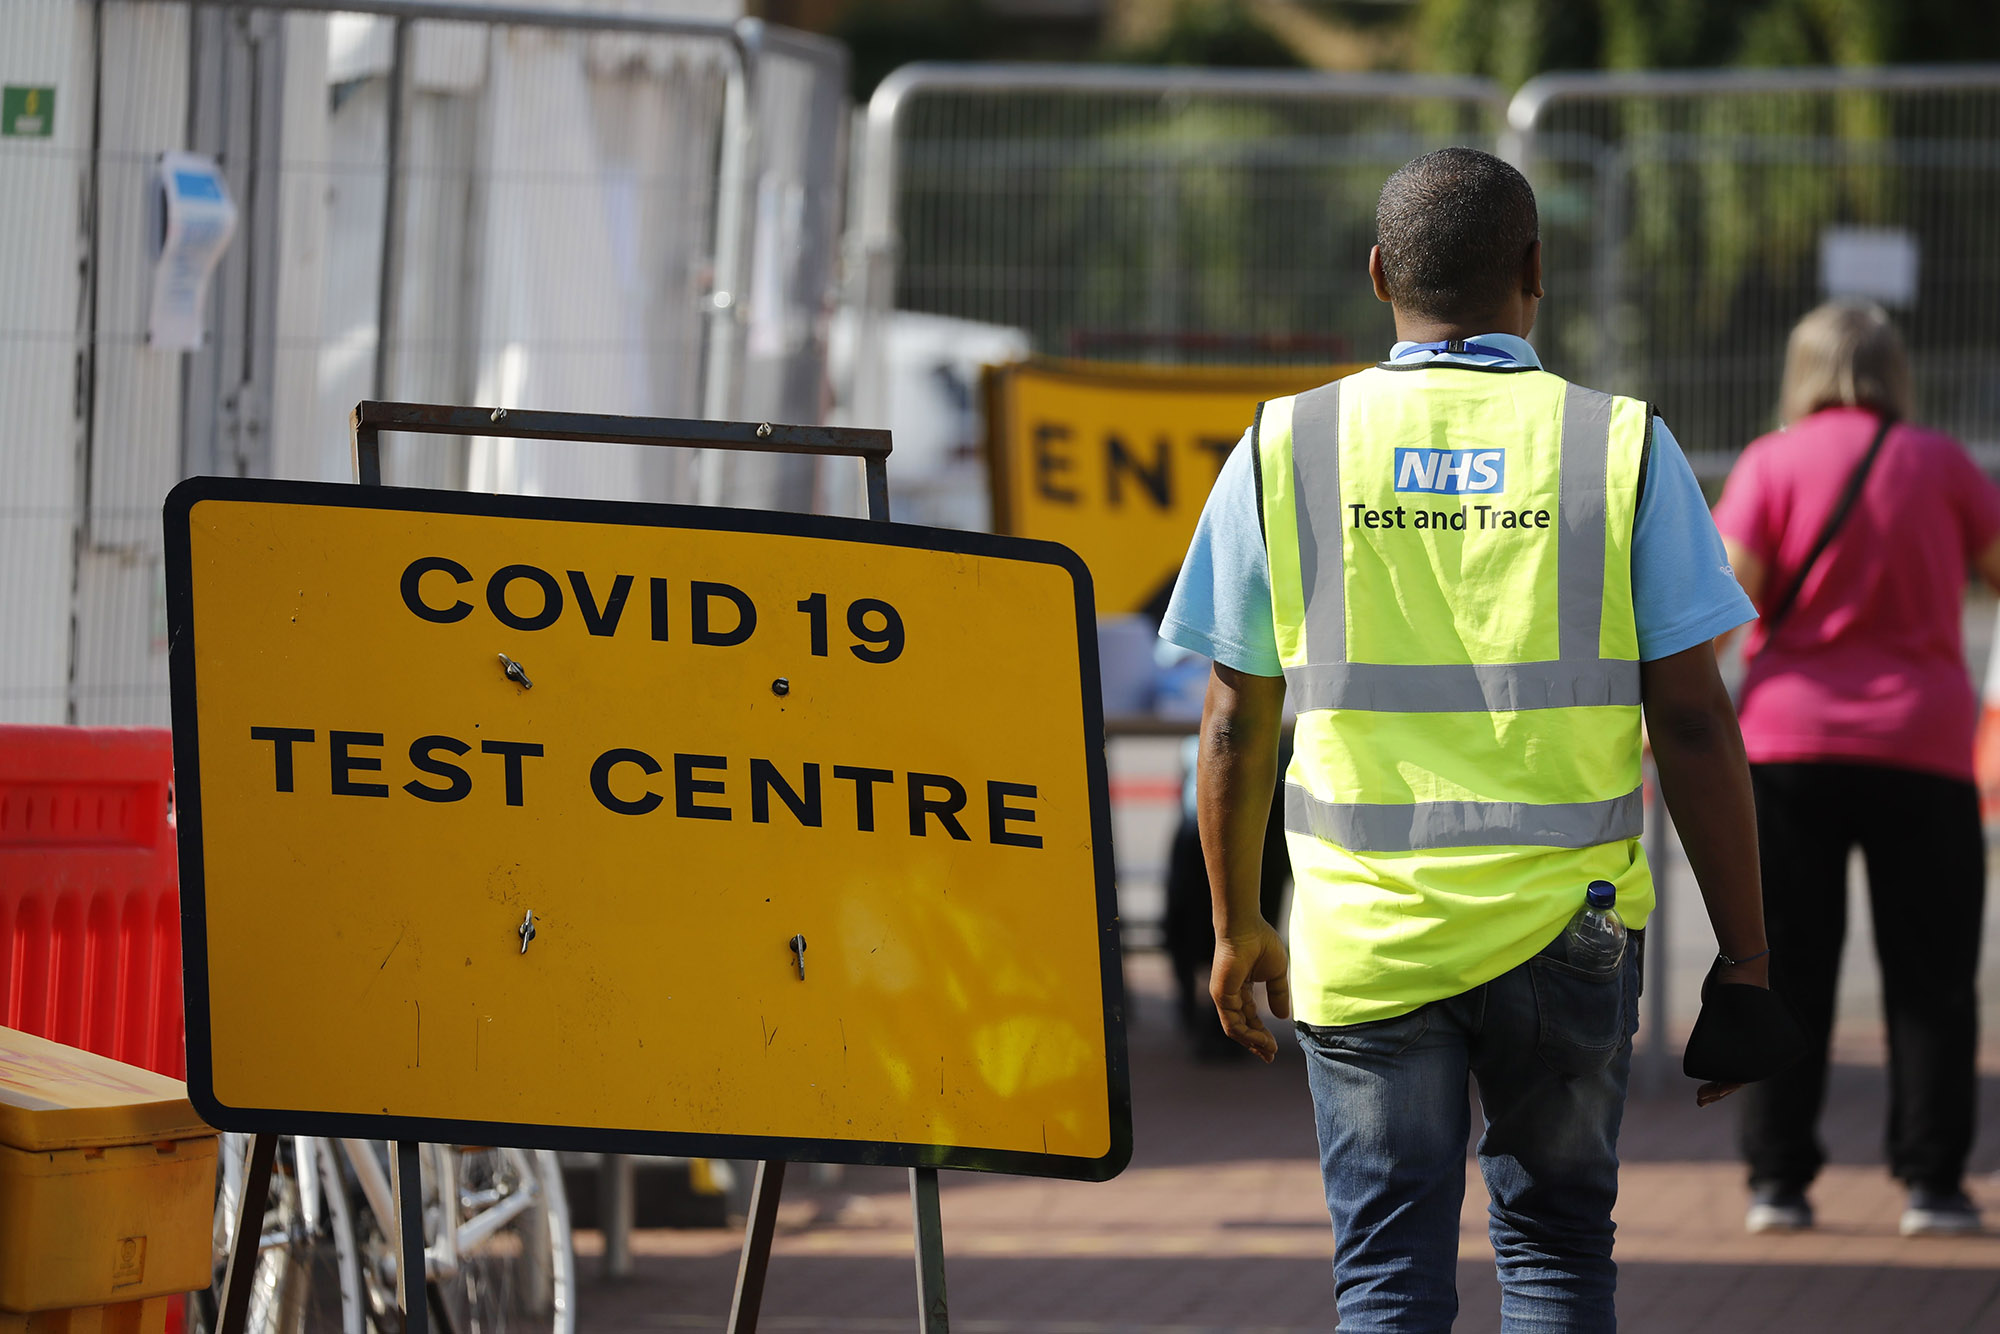 An employee of the NHS test and trace program&nbsp;staffs a covid-19 testing centre in north London on Sept. 16.&nbsp;